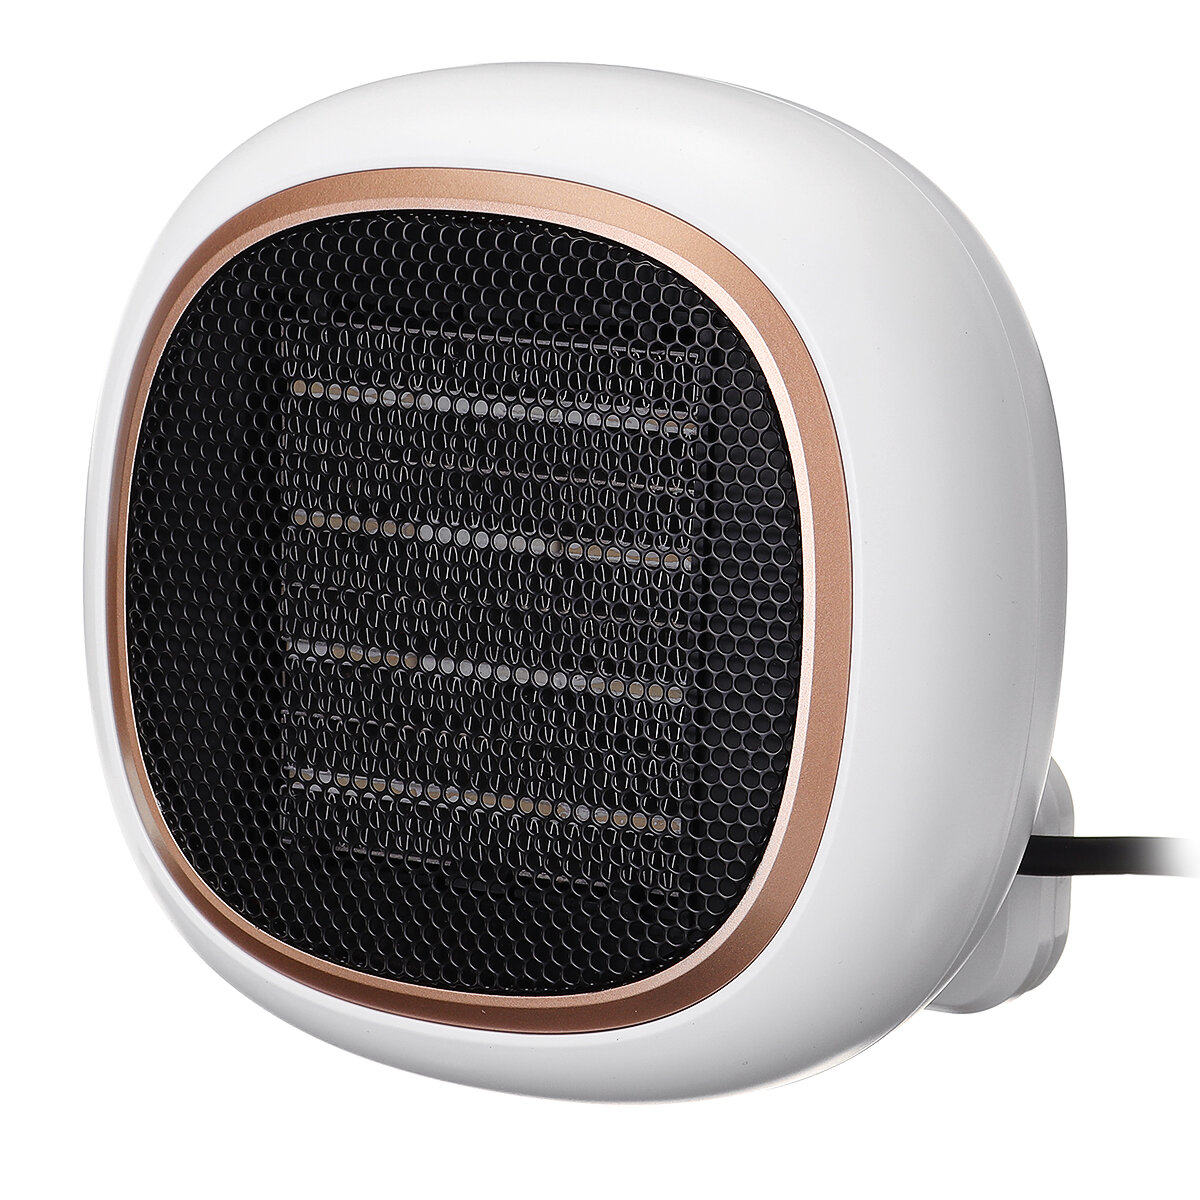 Mini Wall Mounted Portable Electric Space Heater Fan 2 Gear Desktop Warm Air Blower PTC Ceramic Heating for Home Office